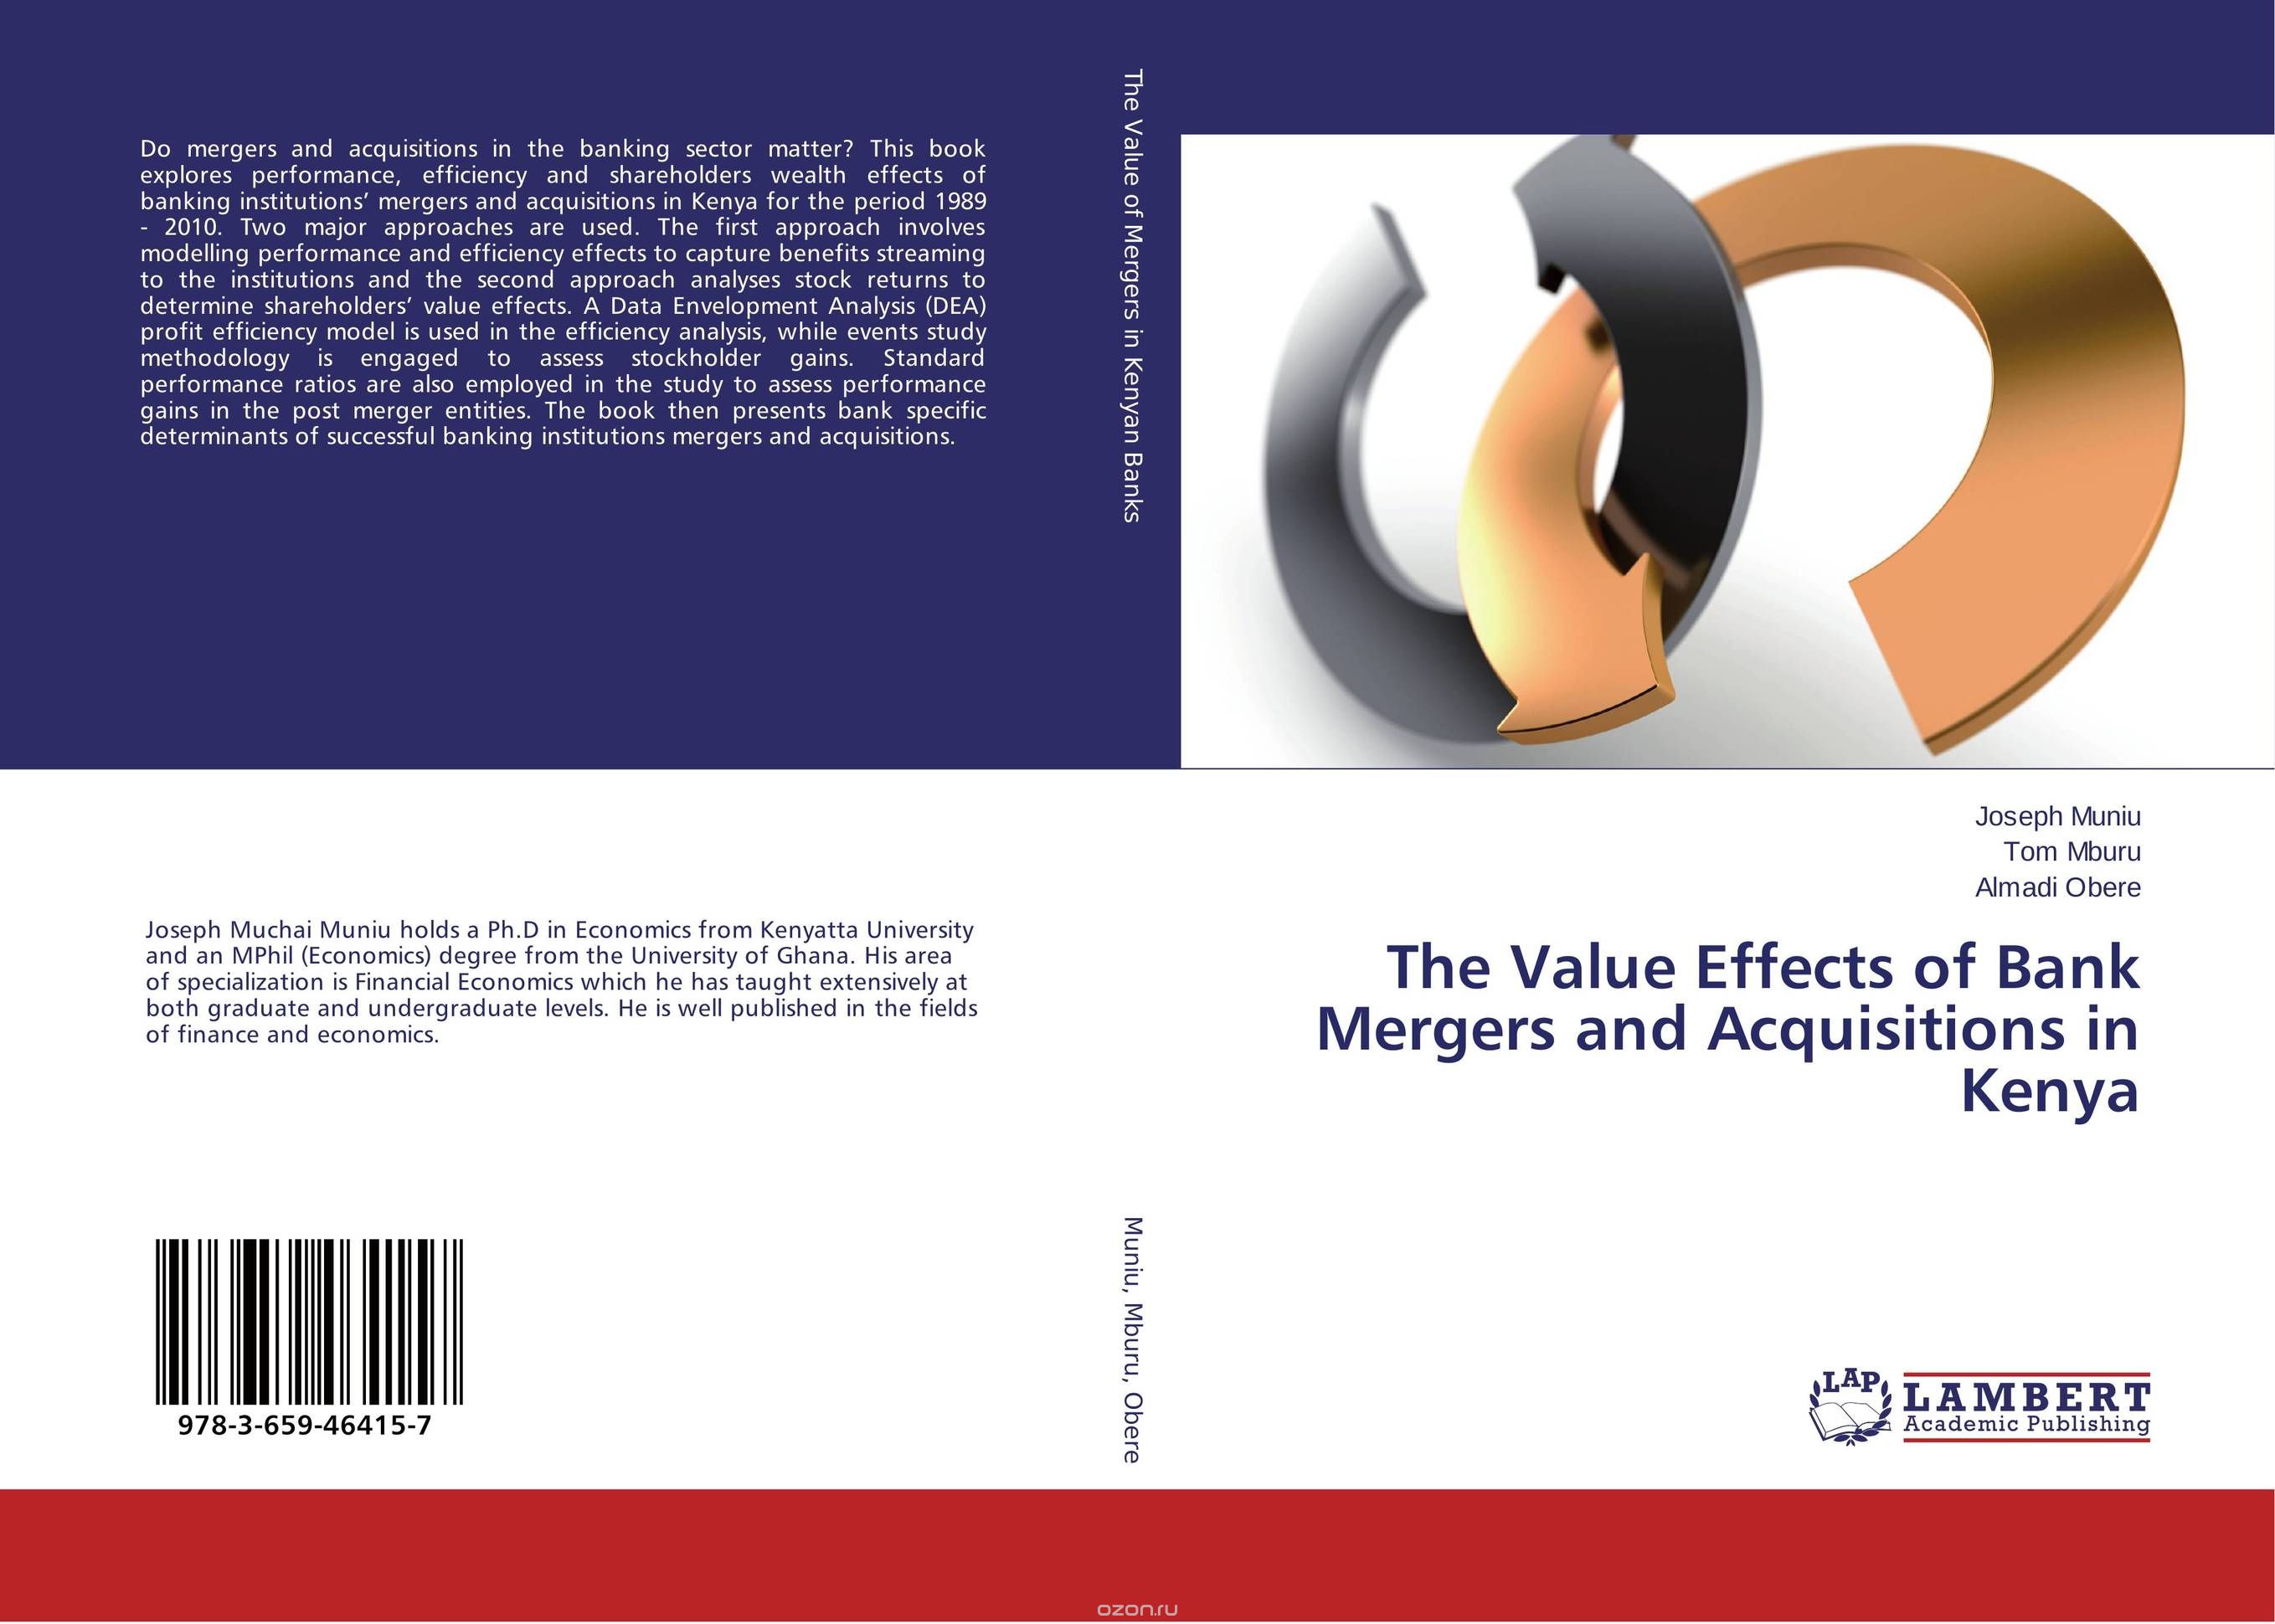 Скачать книгу "The Value Effects of Bank Mergers and Acquisitions in Kenya"